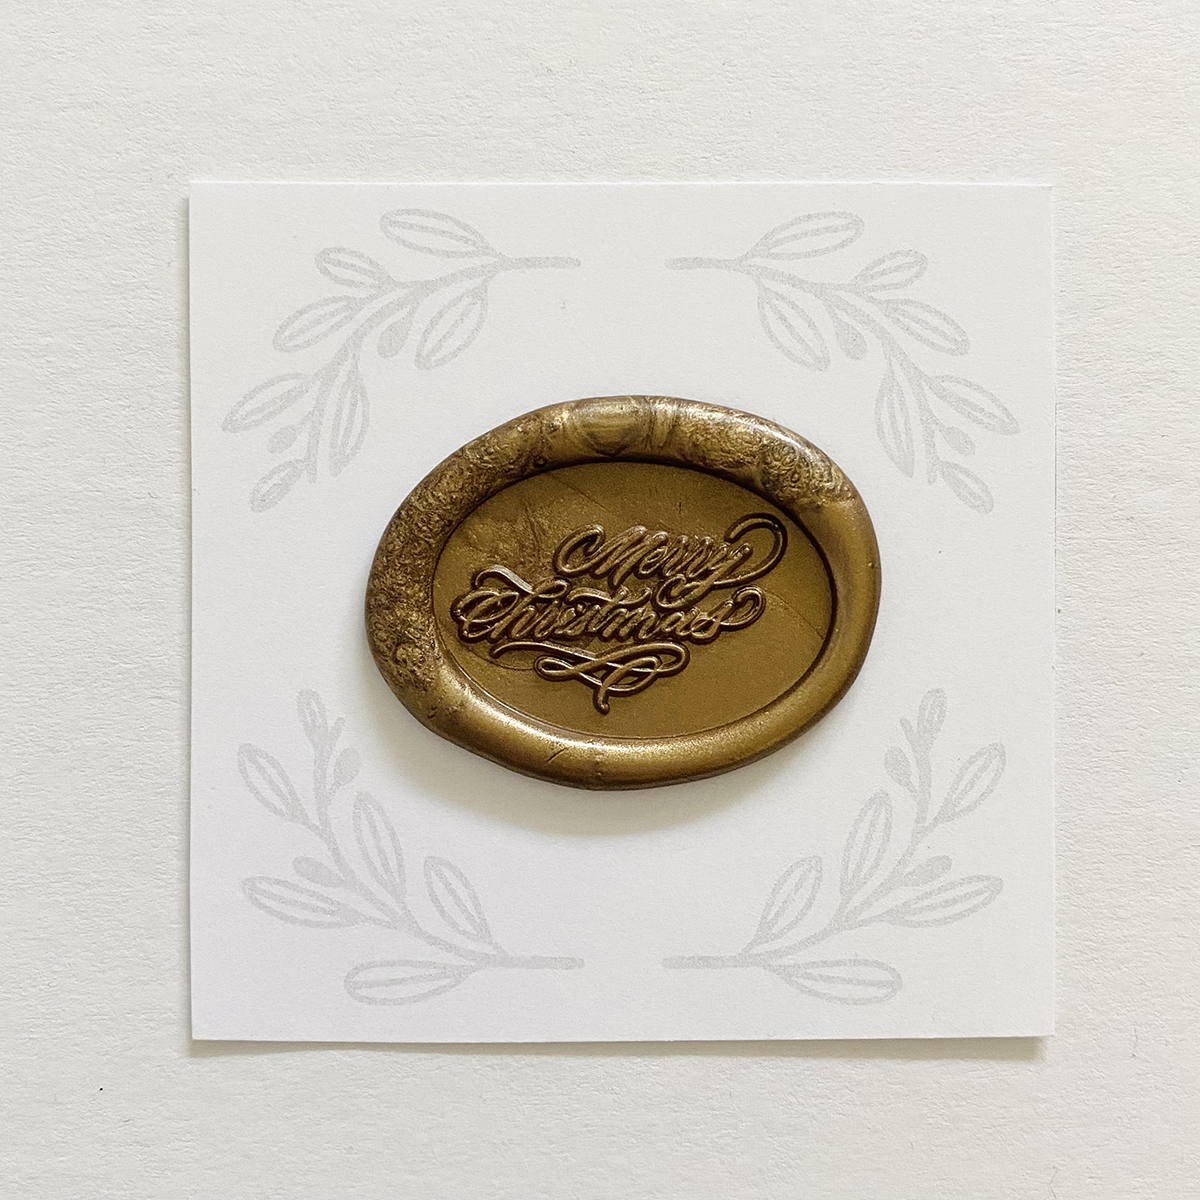 Oval Merry Christmas Wax Seal Stamp